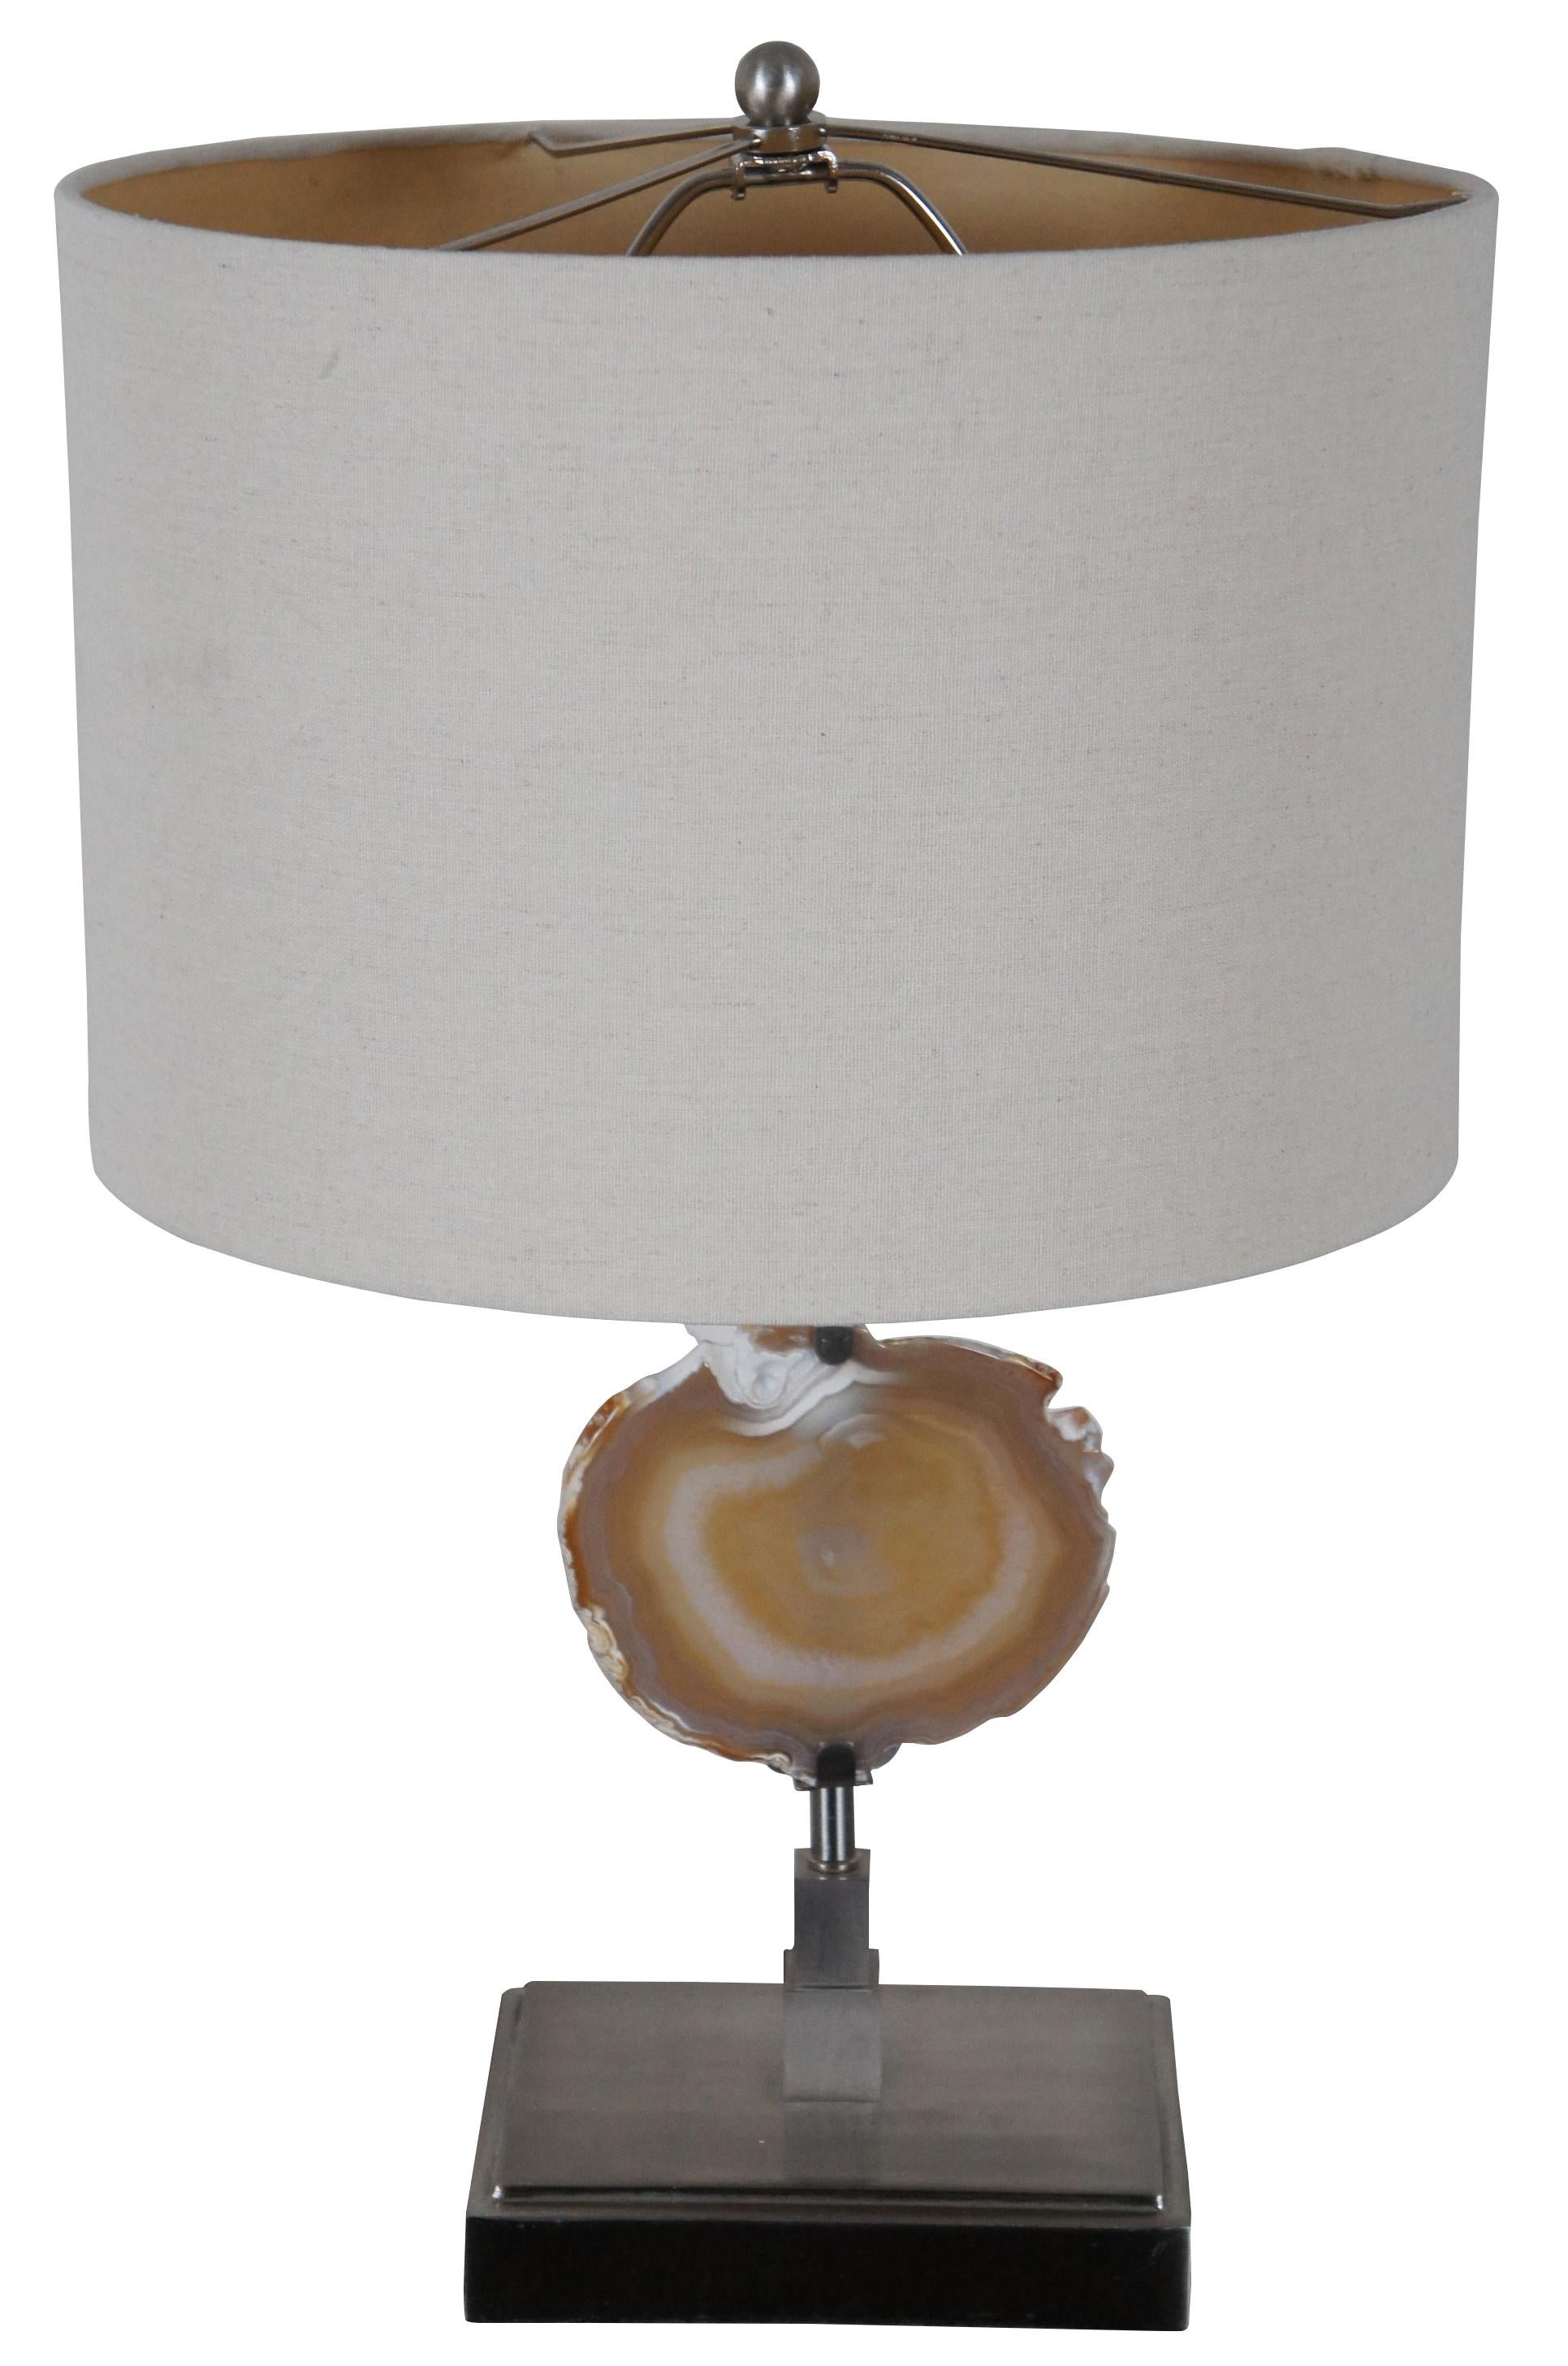 Modern steel table lamp with mounted polished Agate geode specimen and white shade.

Measures: 7” x 5” x 16” / shade - 13” x 9” / Height to Top of Finial – 22” (Width x depth x height).